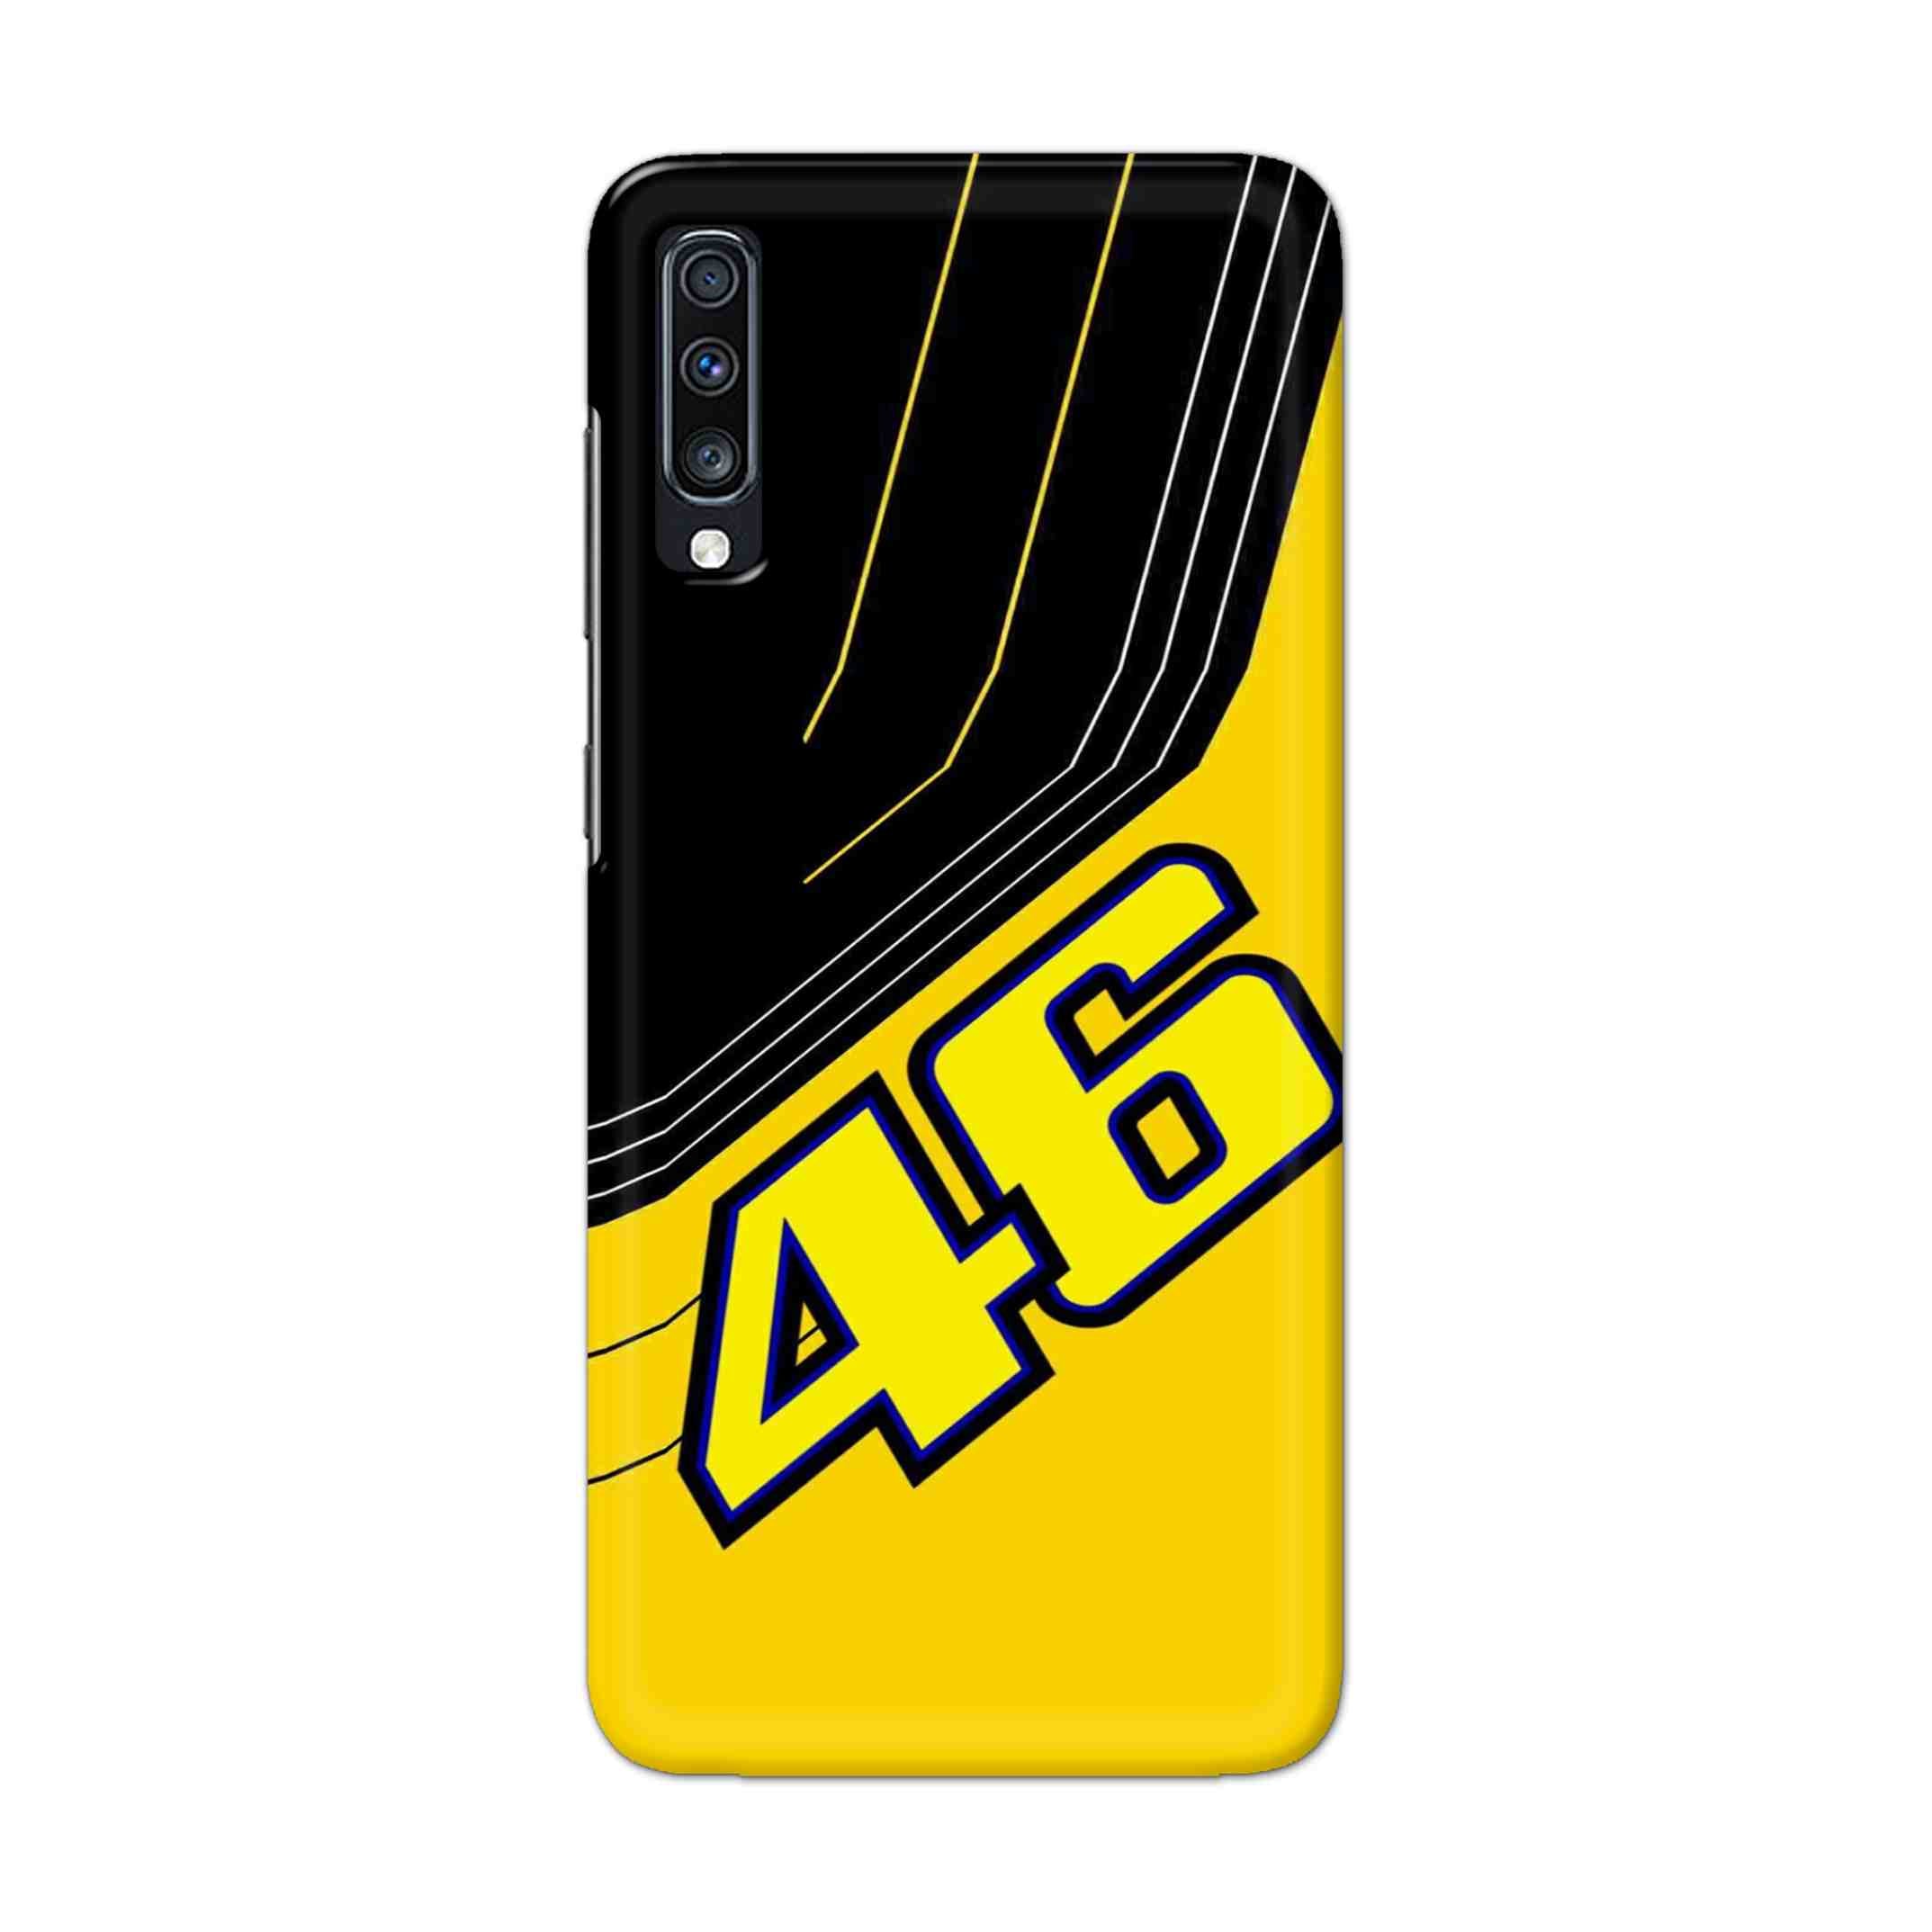 Buy 46 Hard Back Mobile Phone Case Cover For Samsung Galaxy A70 Online